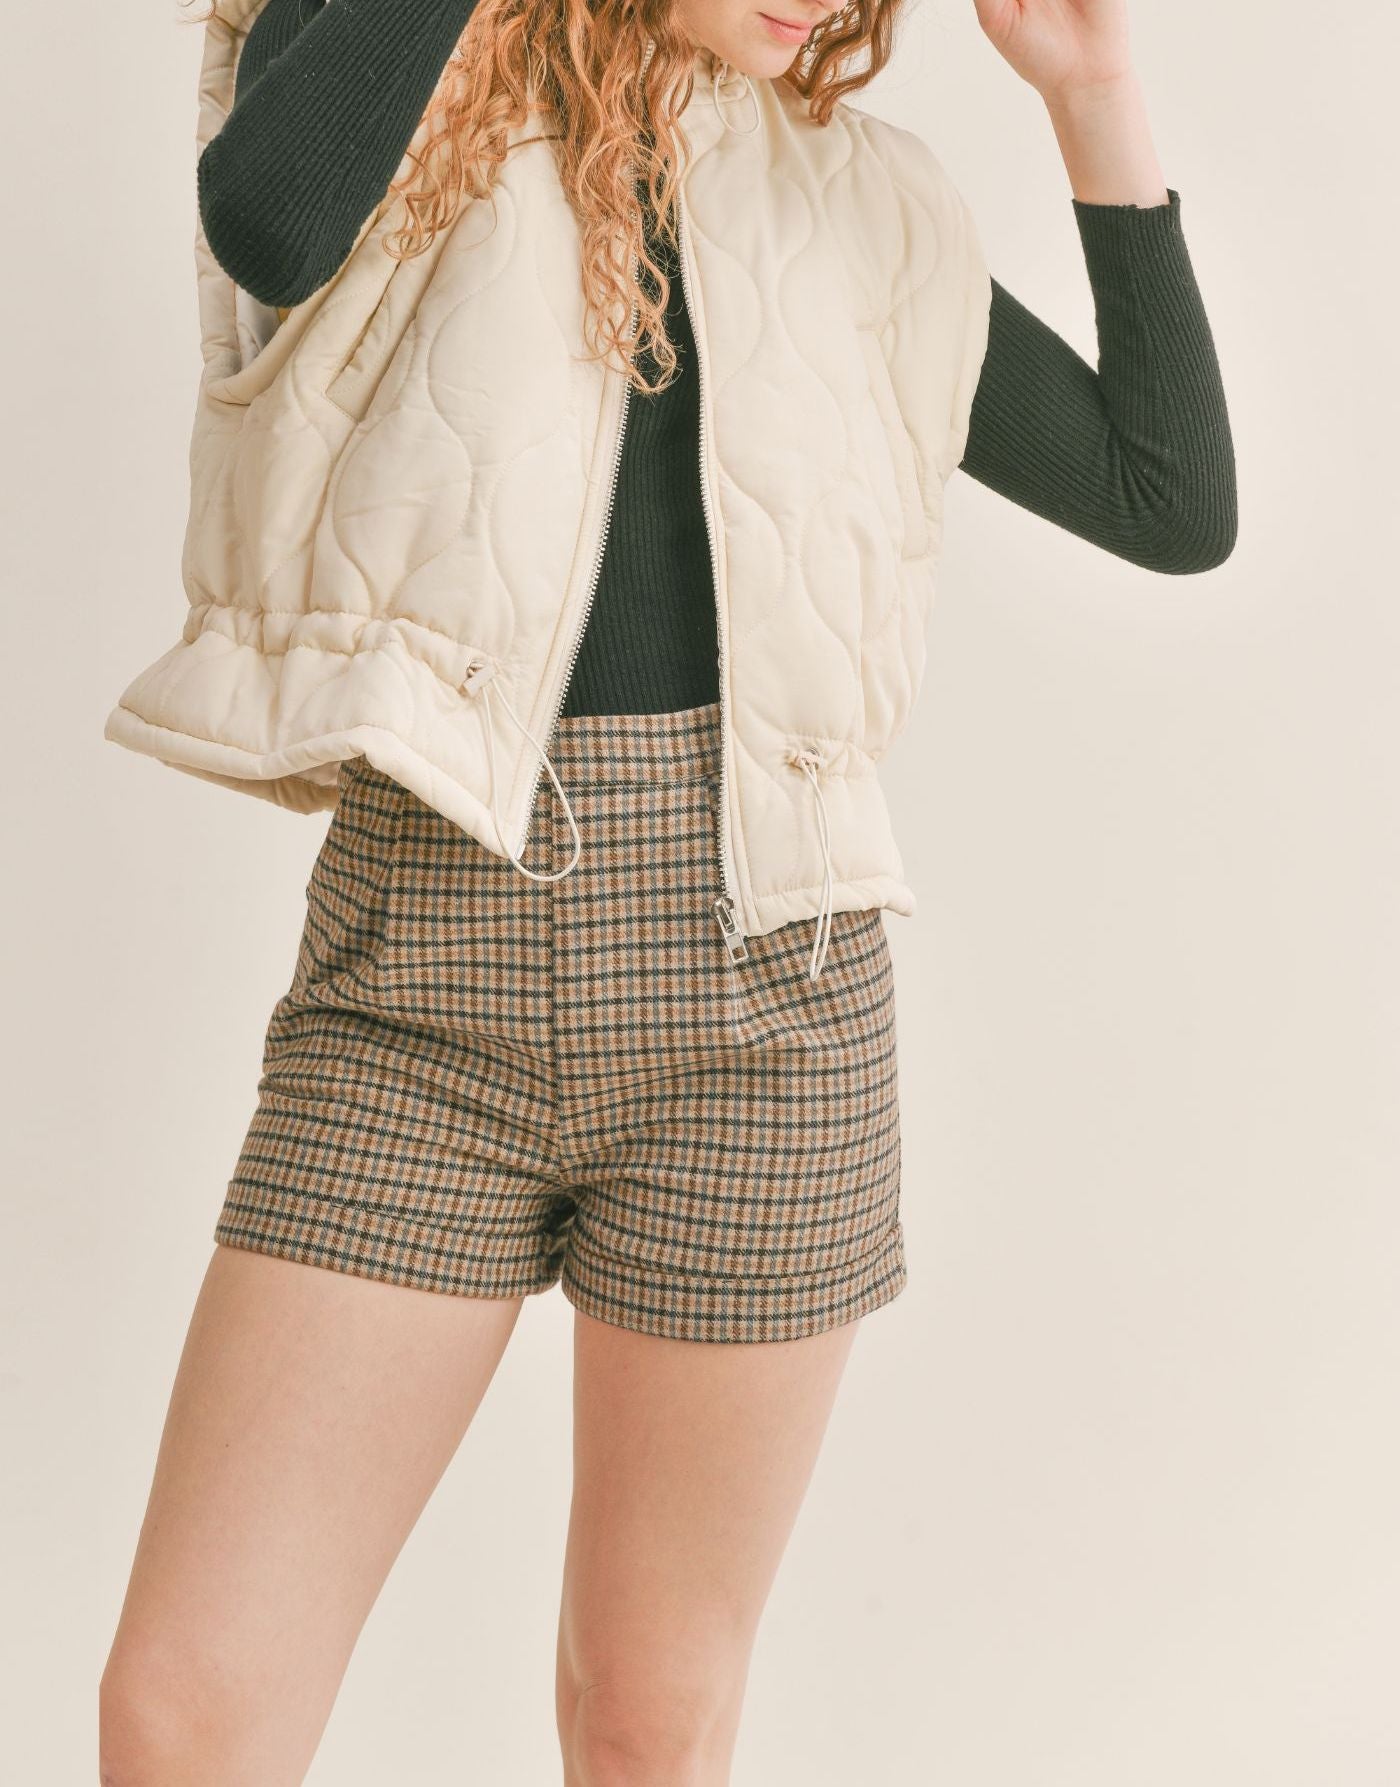 Harlow Quilted Vest